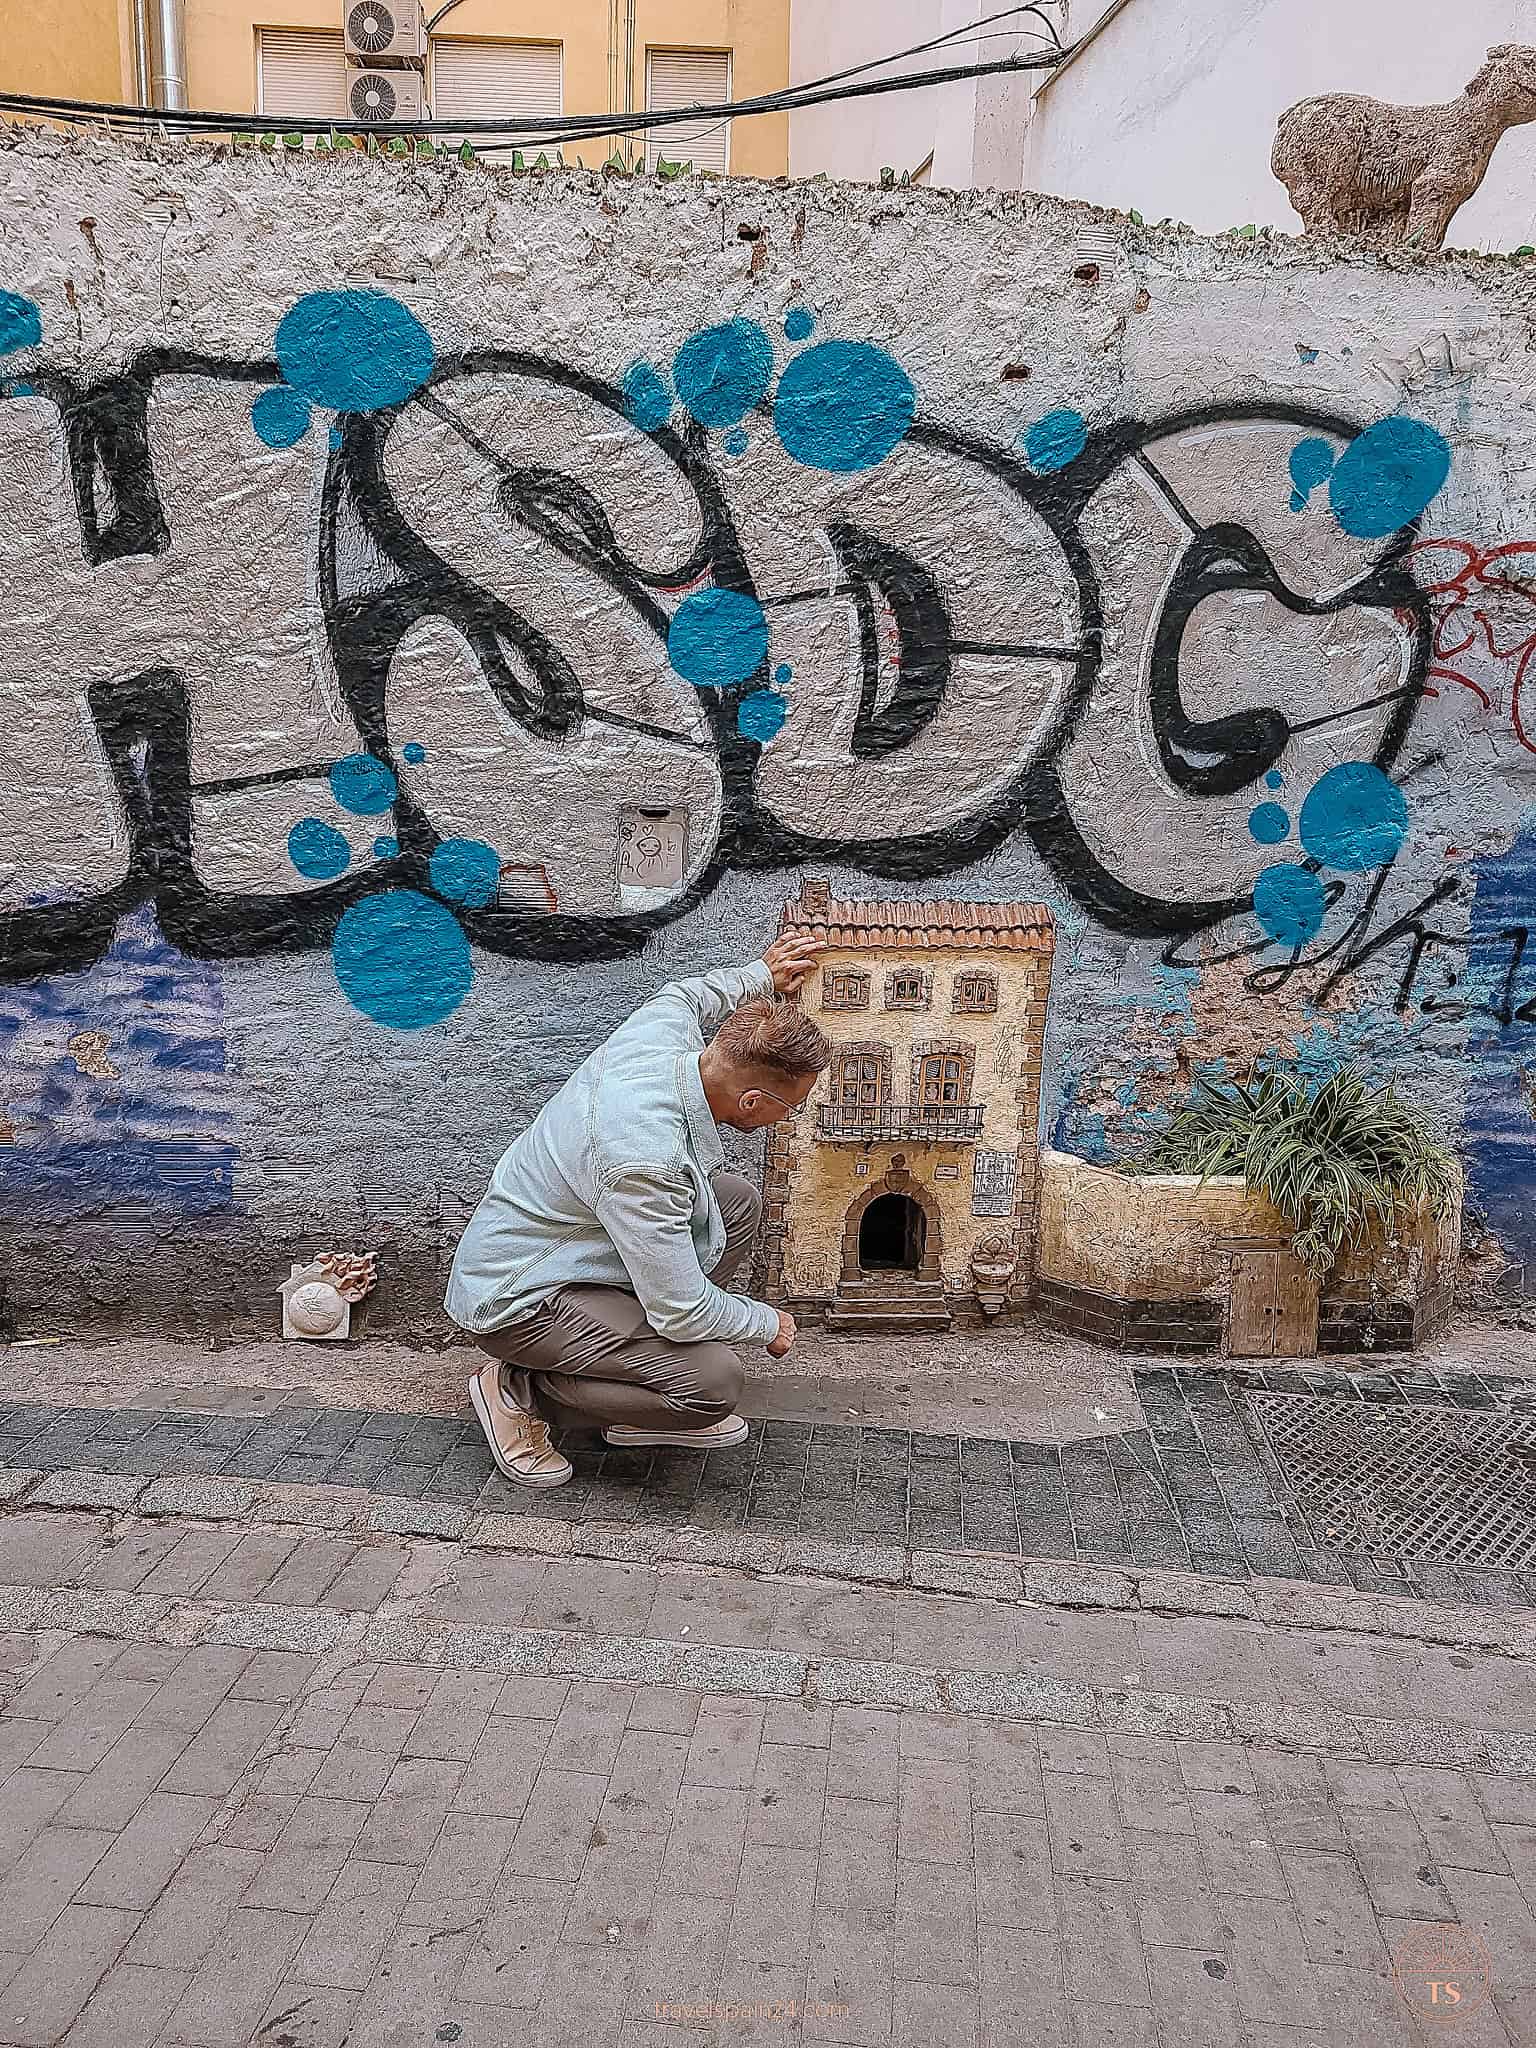 Timon van Basten crouching and peeking into The Cat House in Valencia, a charming little shelter built into the wall for street cats, illustrating the city's care for its feline residents.